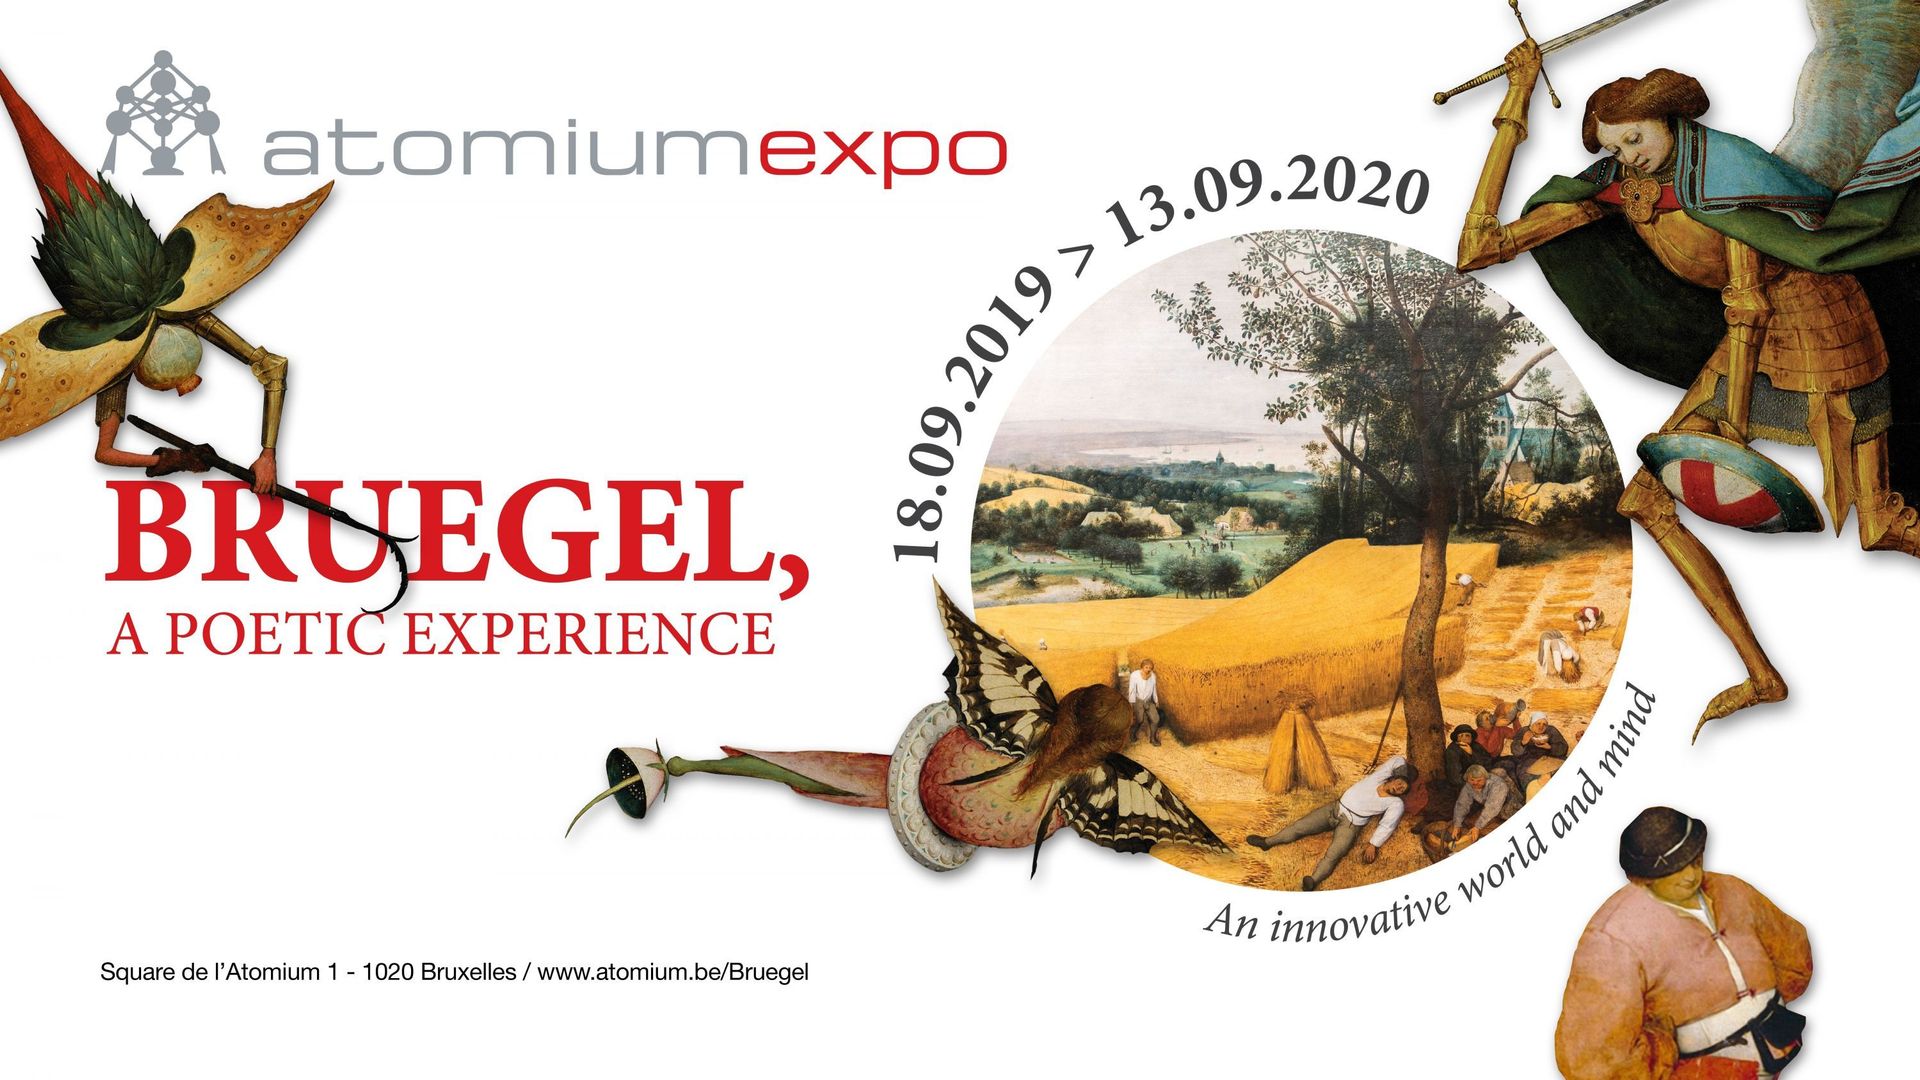 Bruegel, A Poetic Experience. An innovative world and mind 